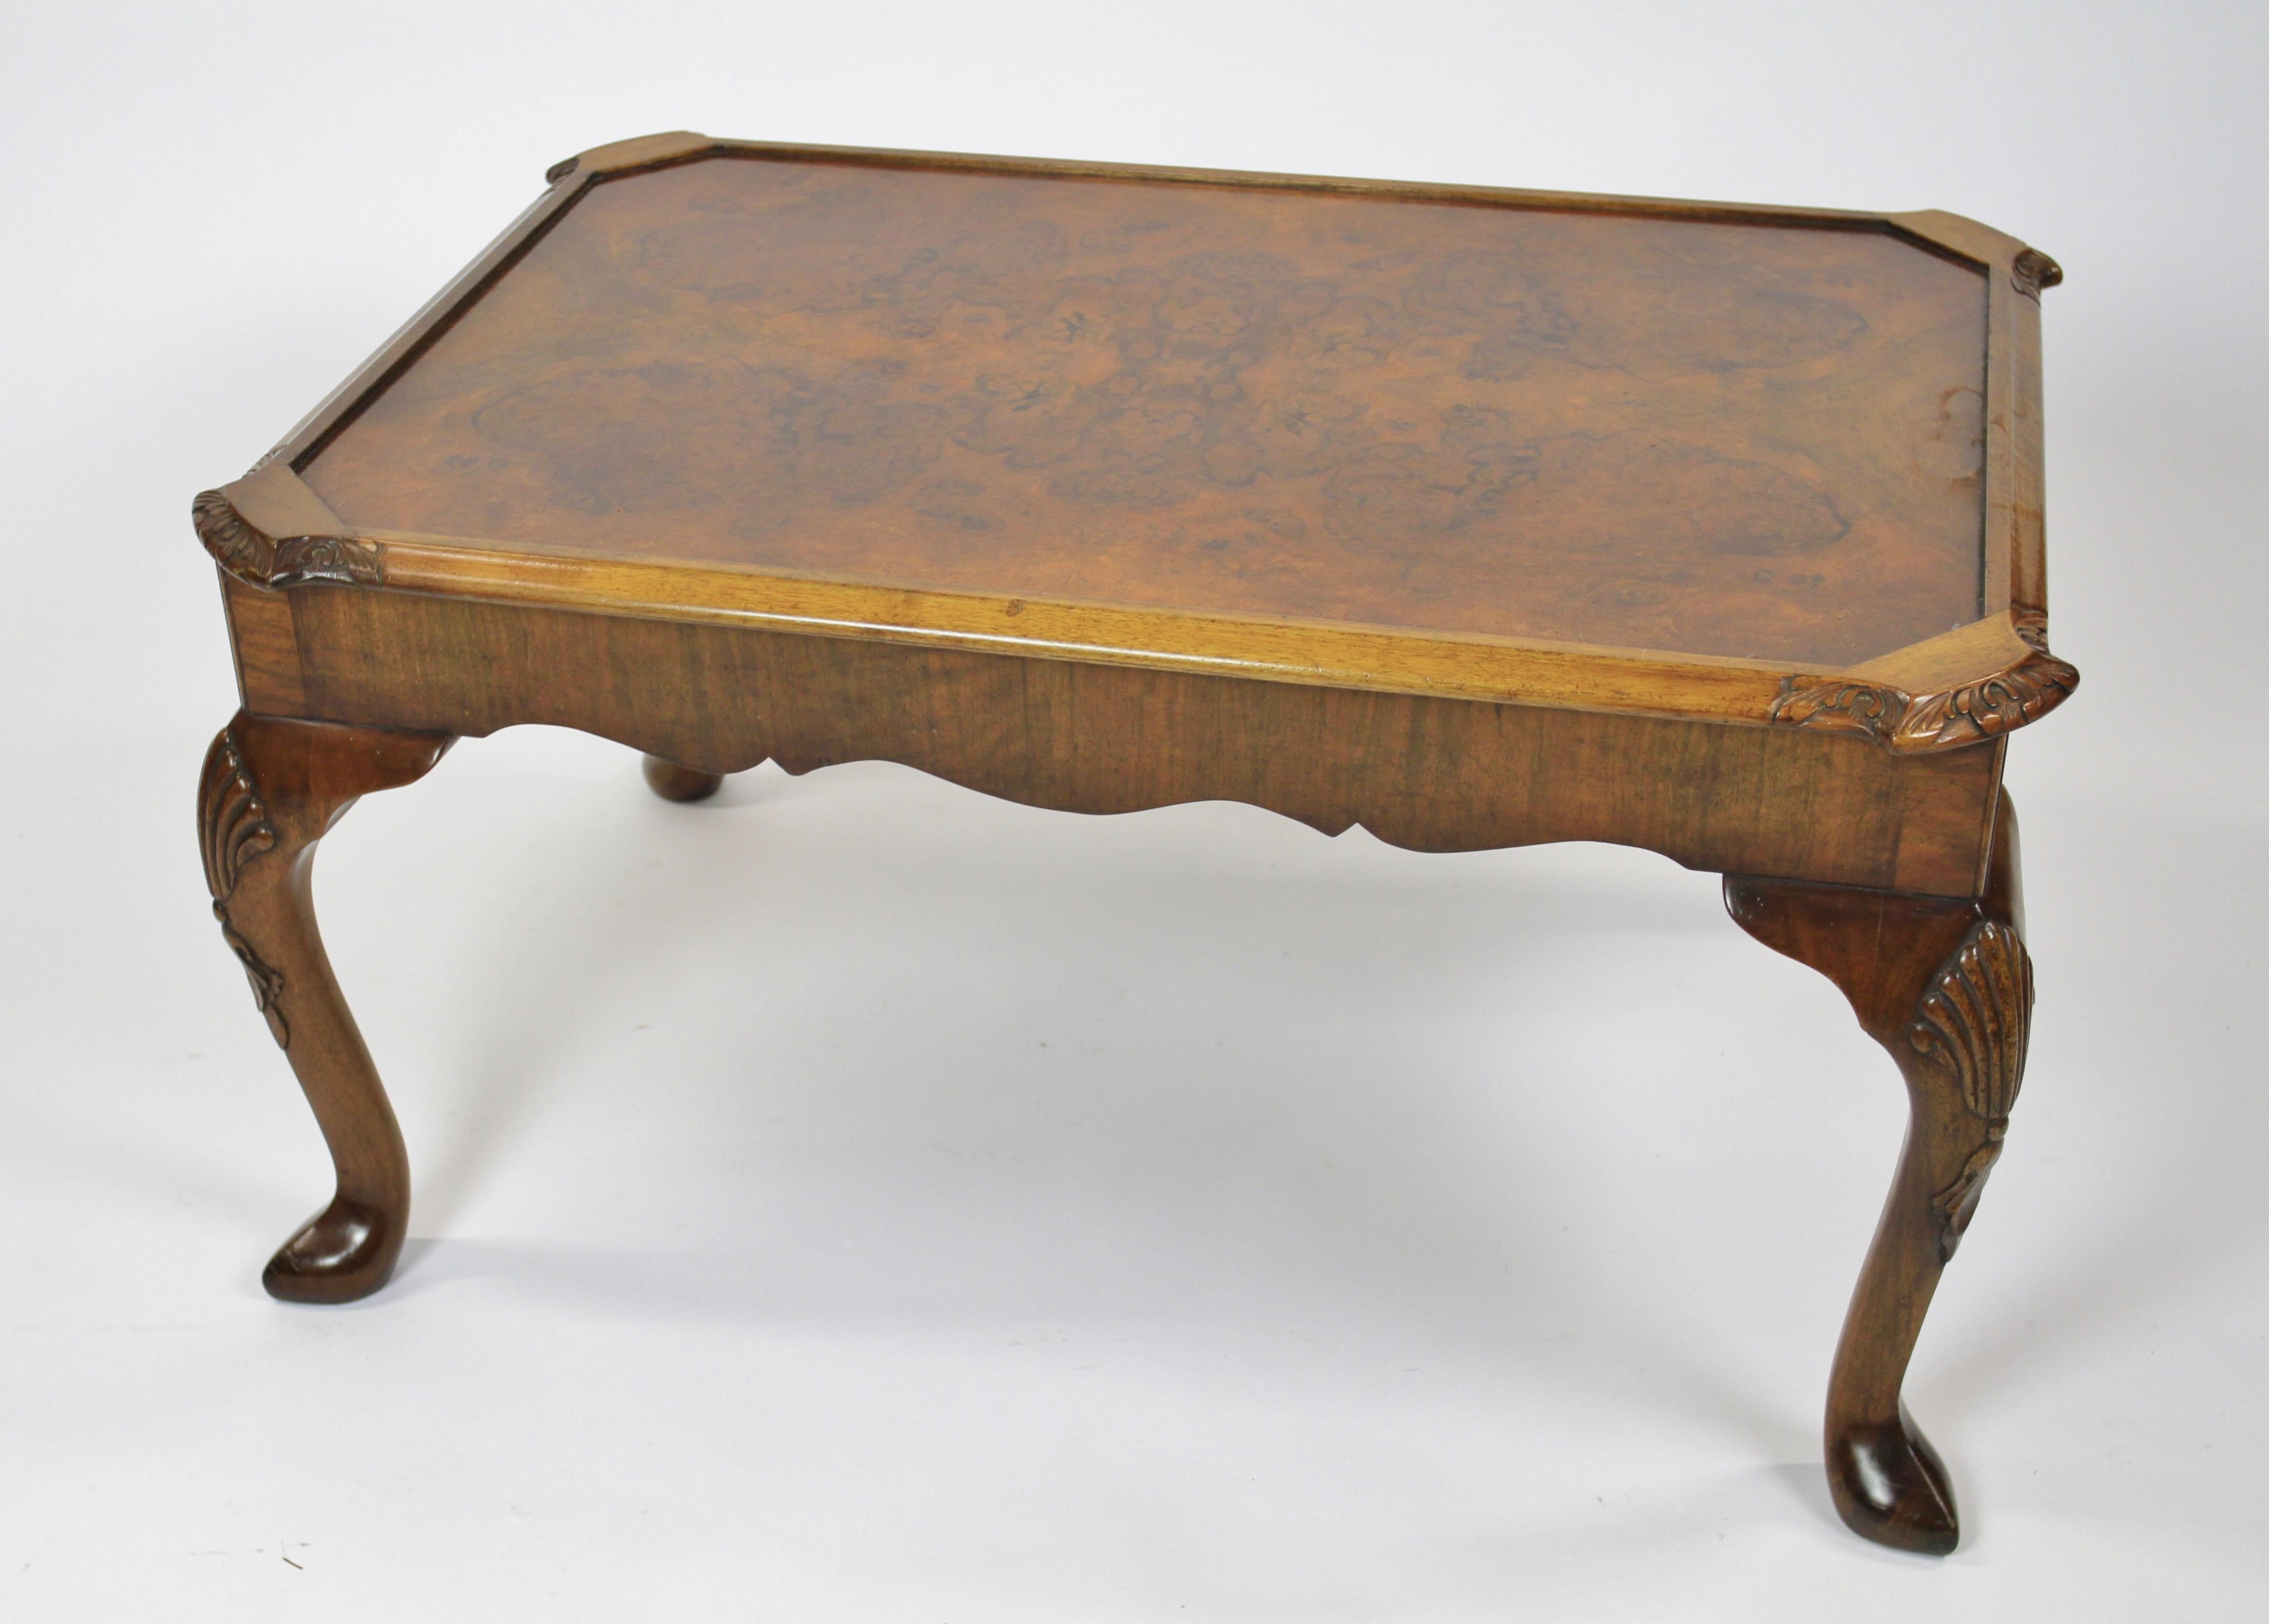 Burr Walnut & Carved Coffee table circa 1930s
Inset Top with Burr Walnut veneer, 
With: inset plate glass top, 
4 canted corners with carved detail, 
Moulded edge, 
Shaped Apron, 
Single Drawer each side, with oak-lined Drawers,
Cabriole shaped legs